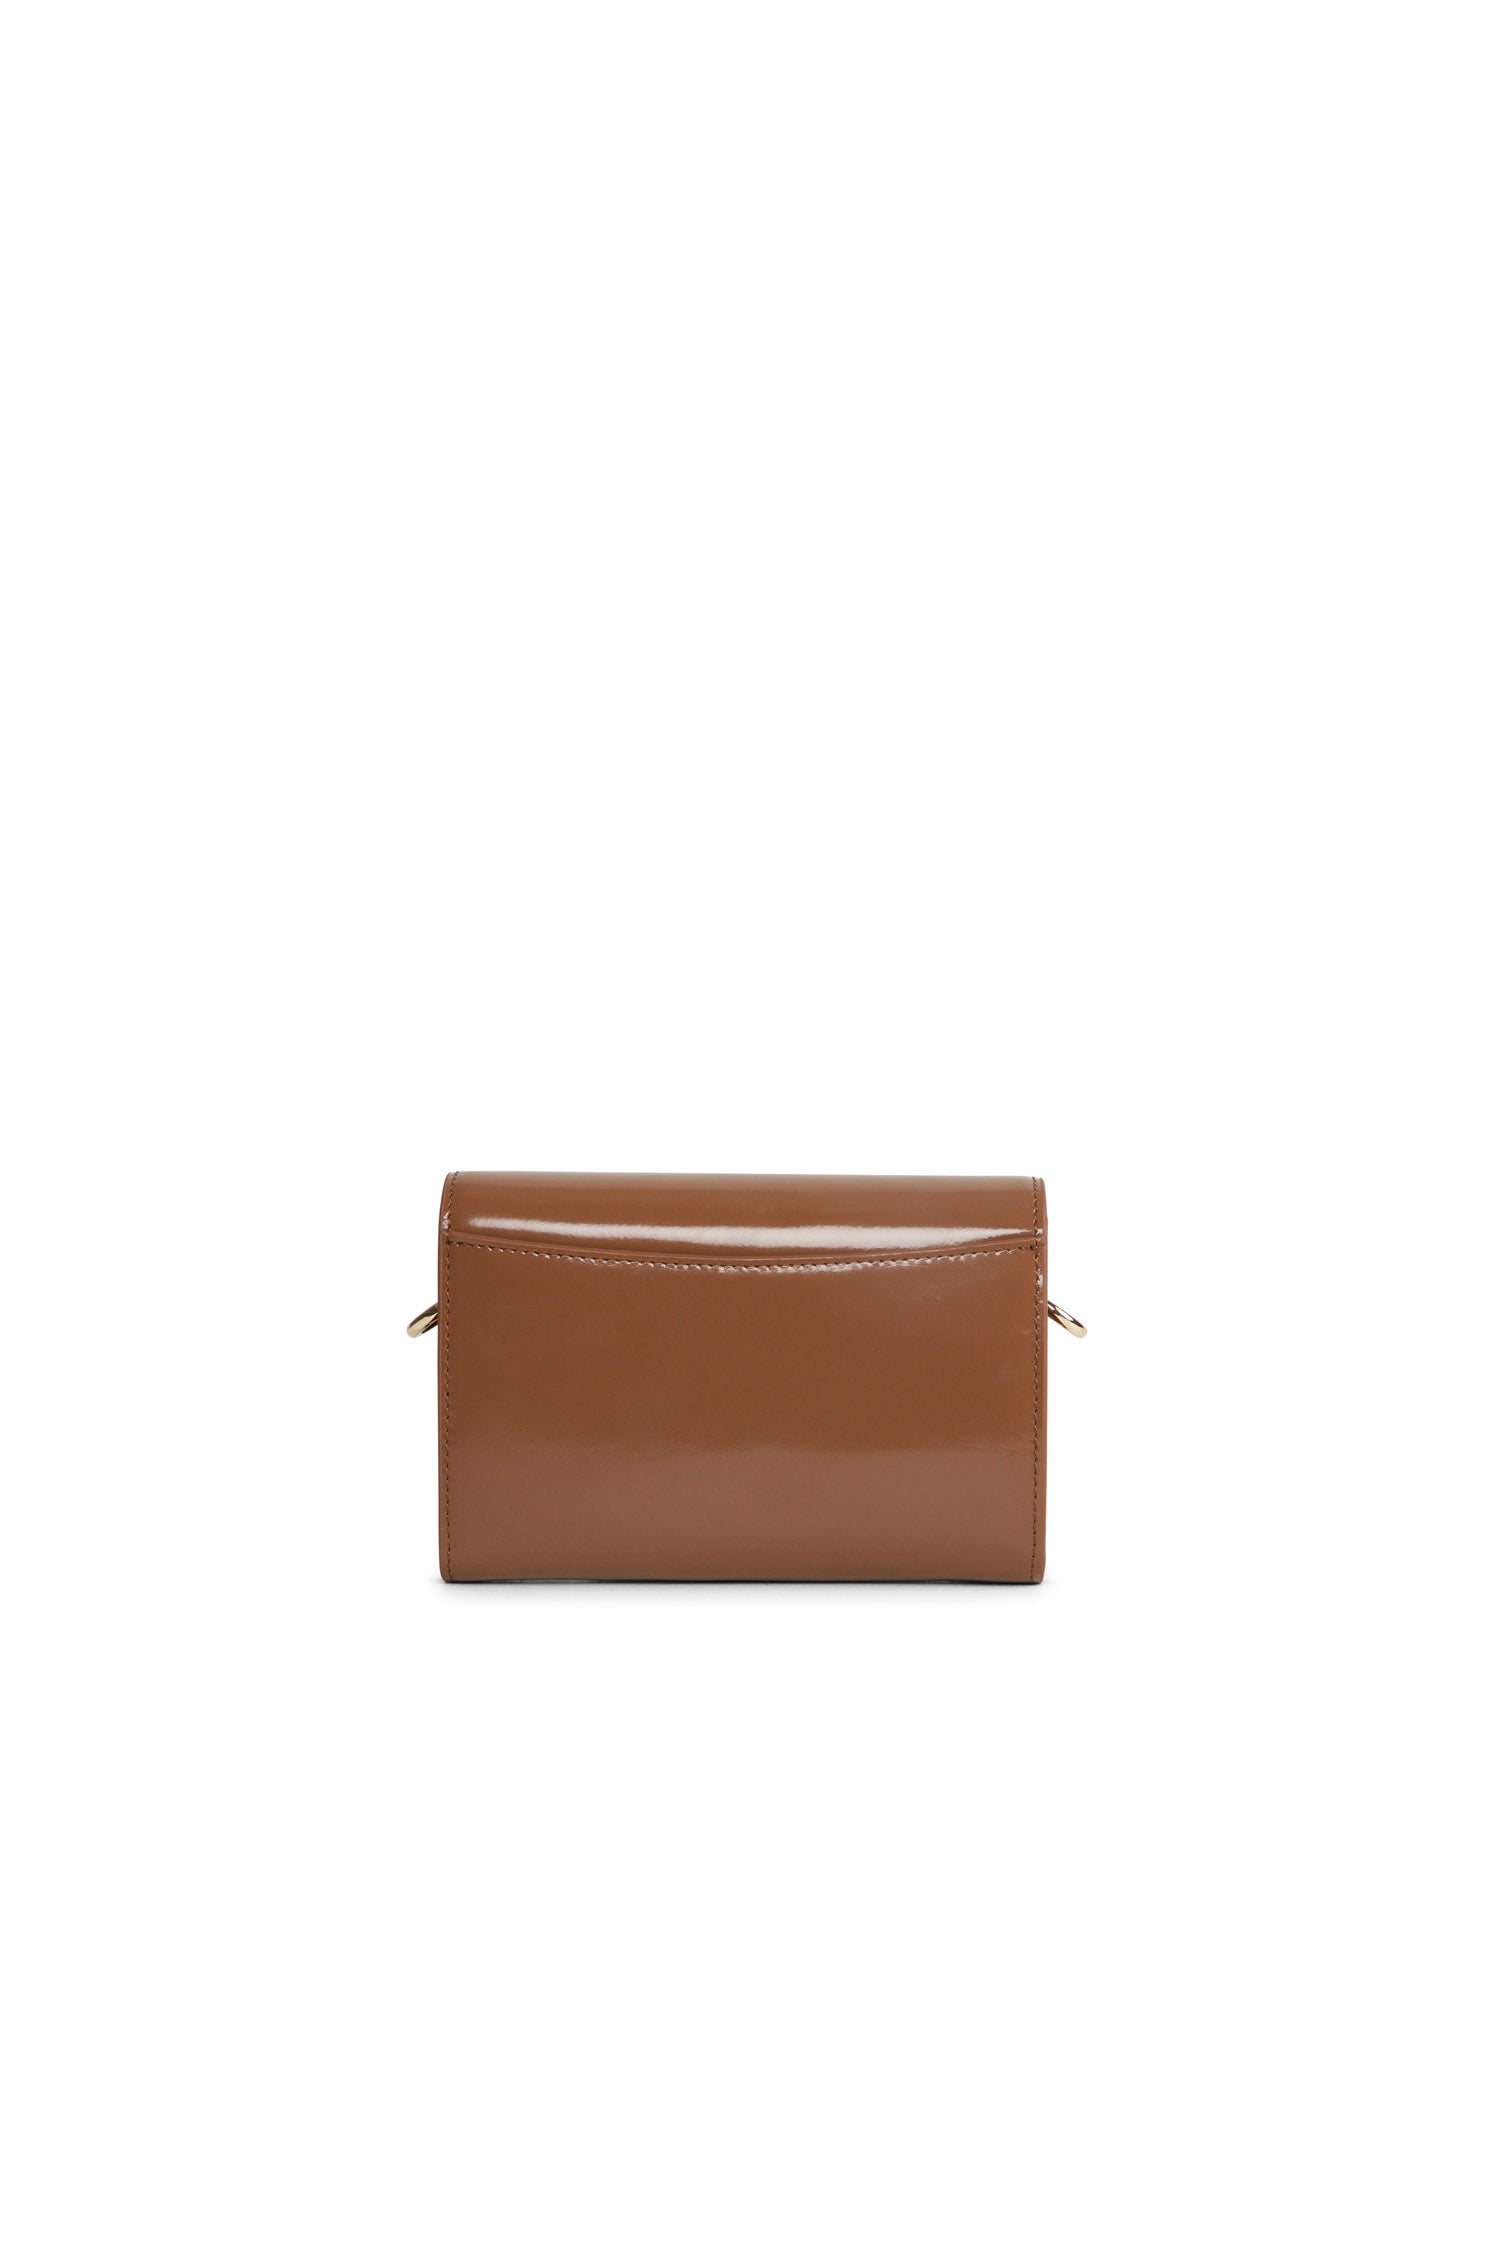 The Juicy Patent Wallet Chocolate - Gift Edit